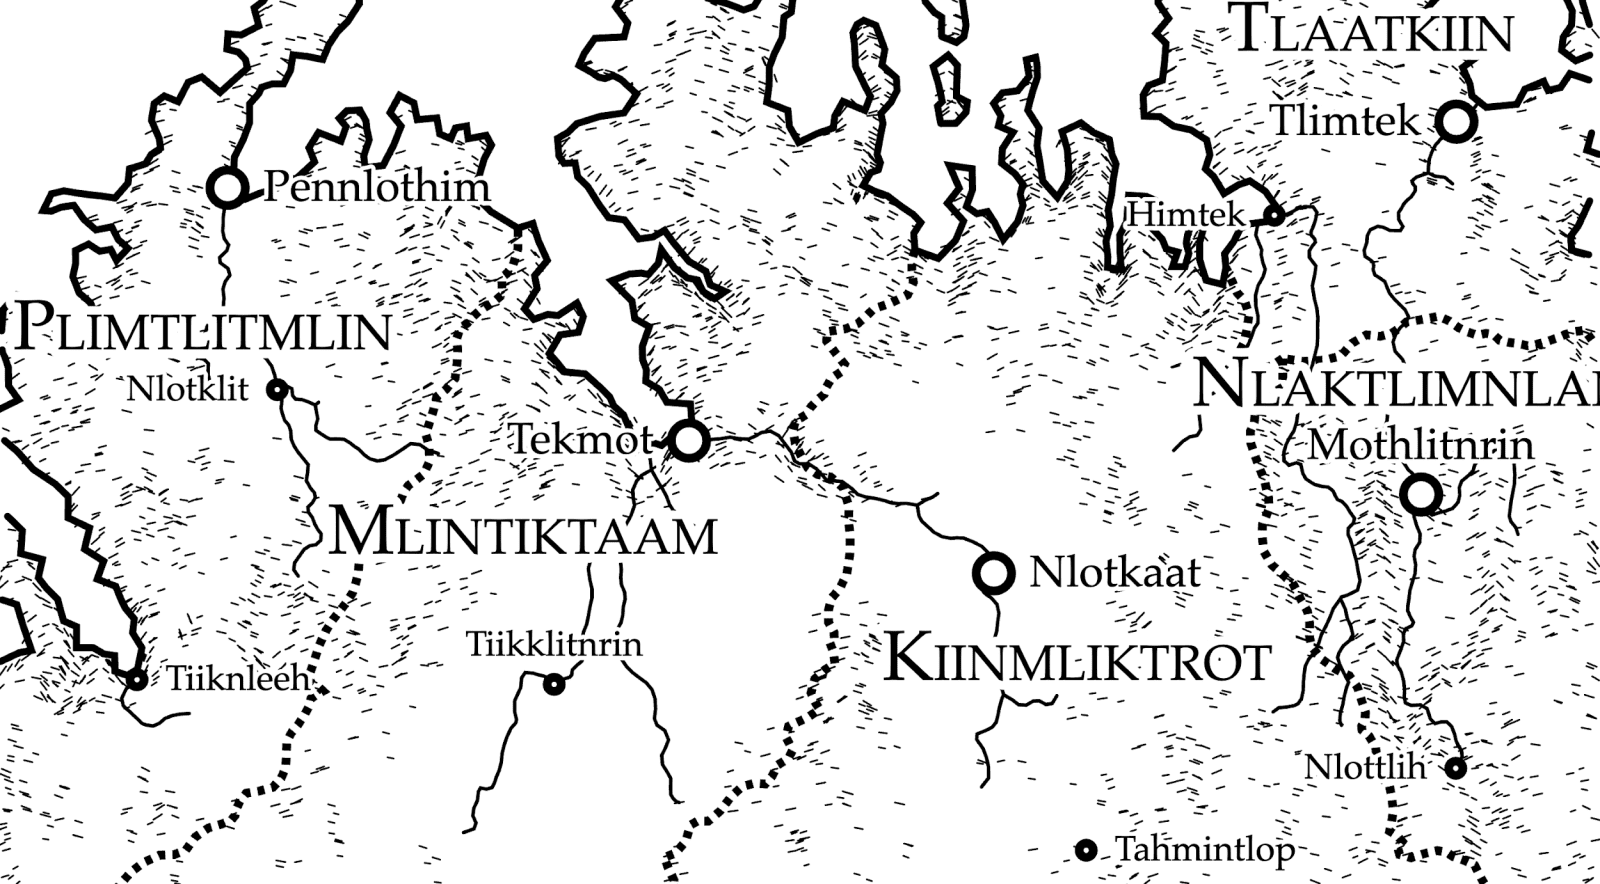 Realms (for Adventurers)